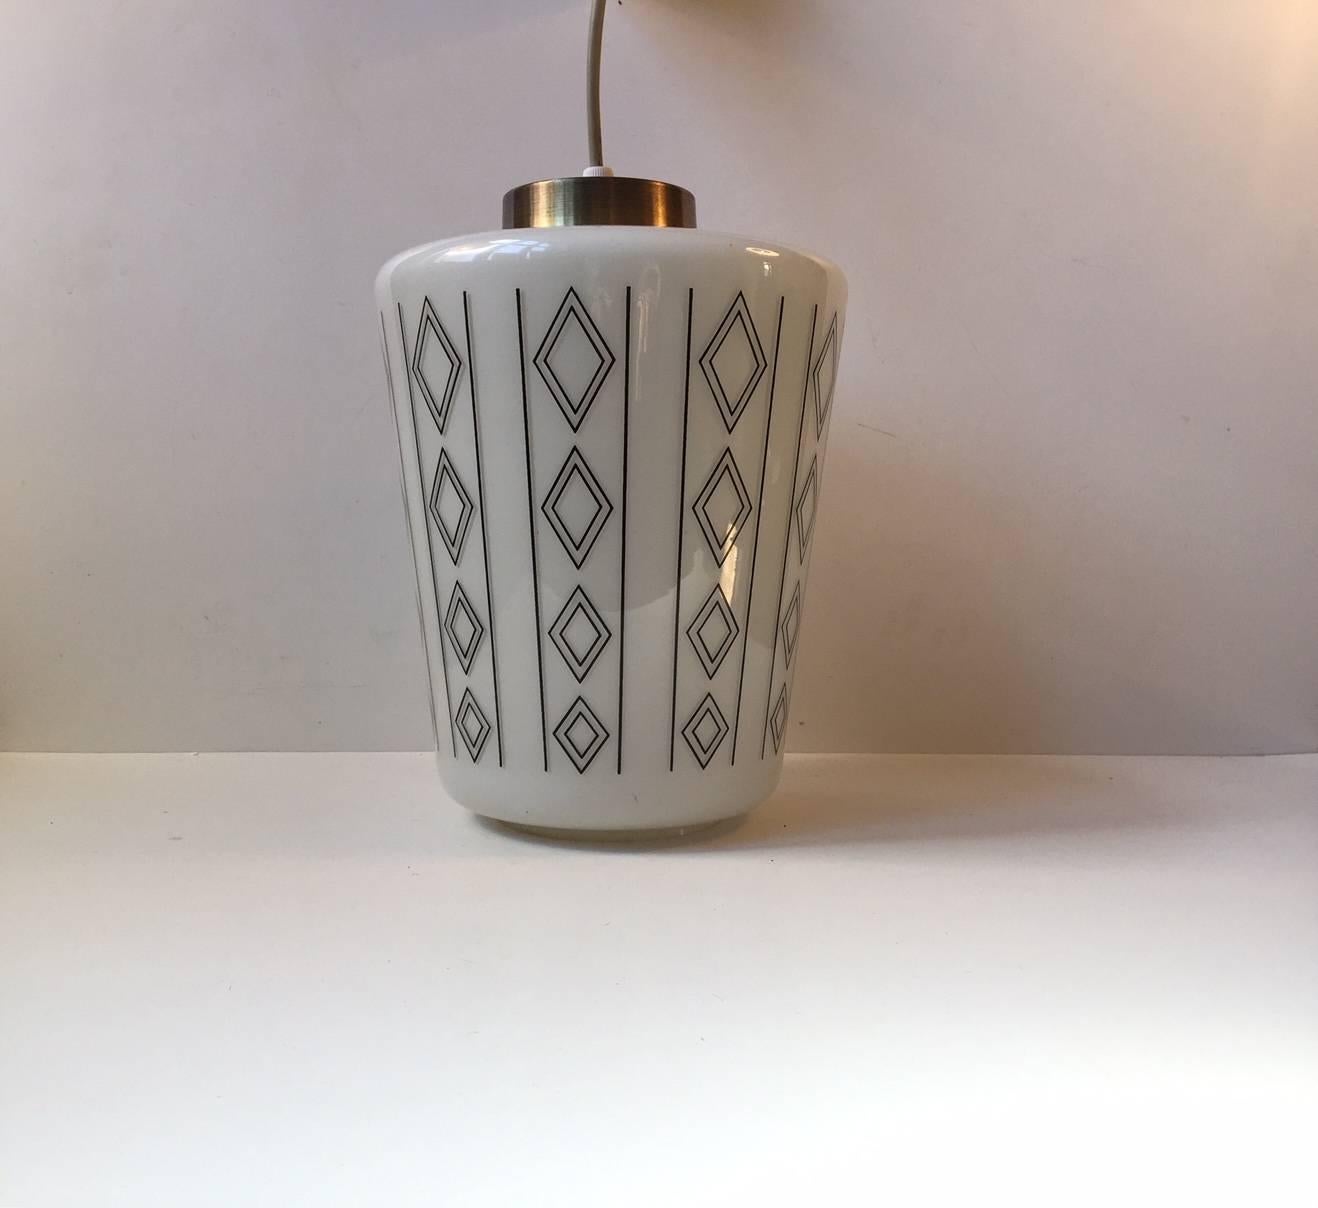 This Danish pendant light features a white opaline glass diffuser set in brass. It is decorated around its perimeter with black geometric decor. It was manufactured and designed in Denmark during the 1950s in a style reminiscent of Lyfa and Fog &